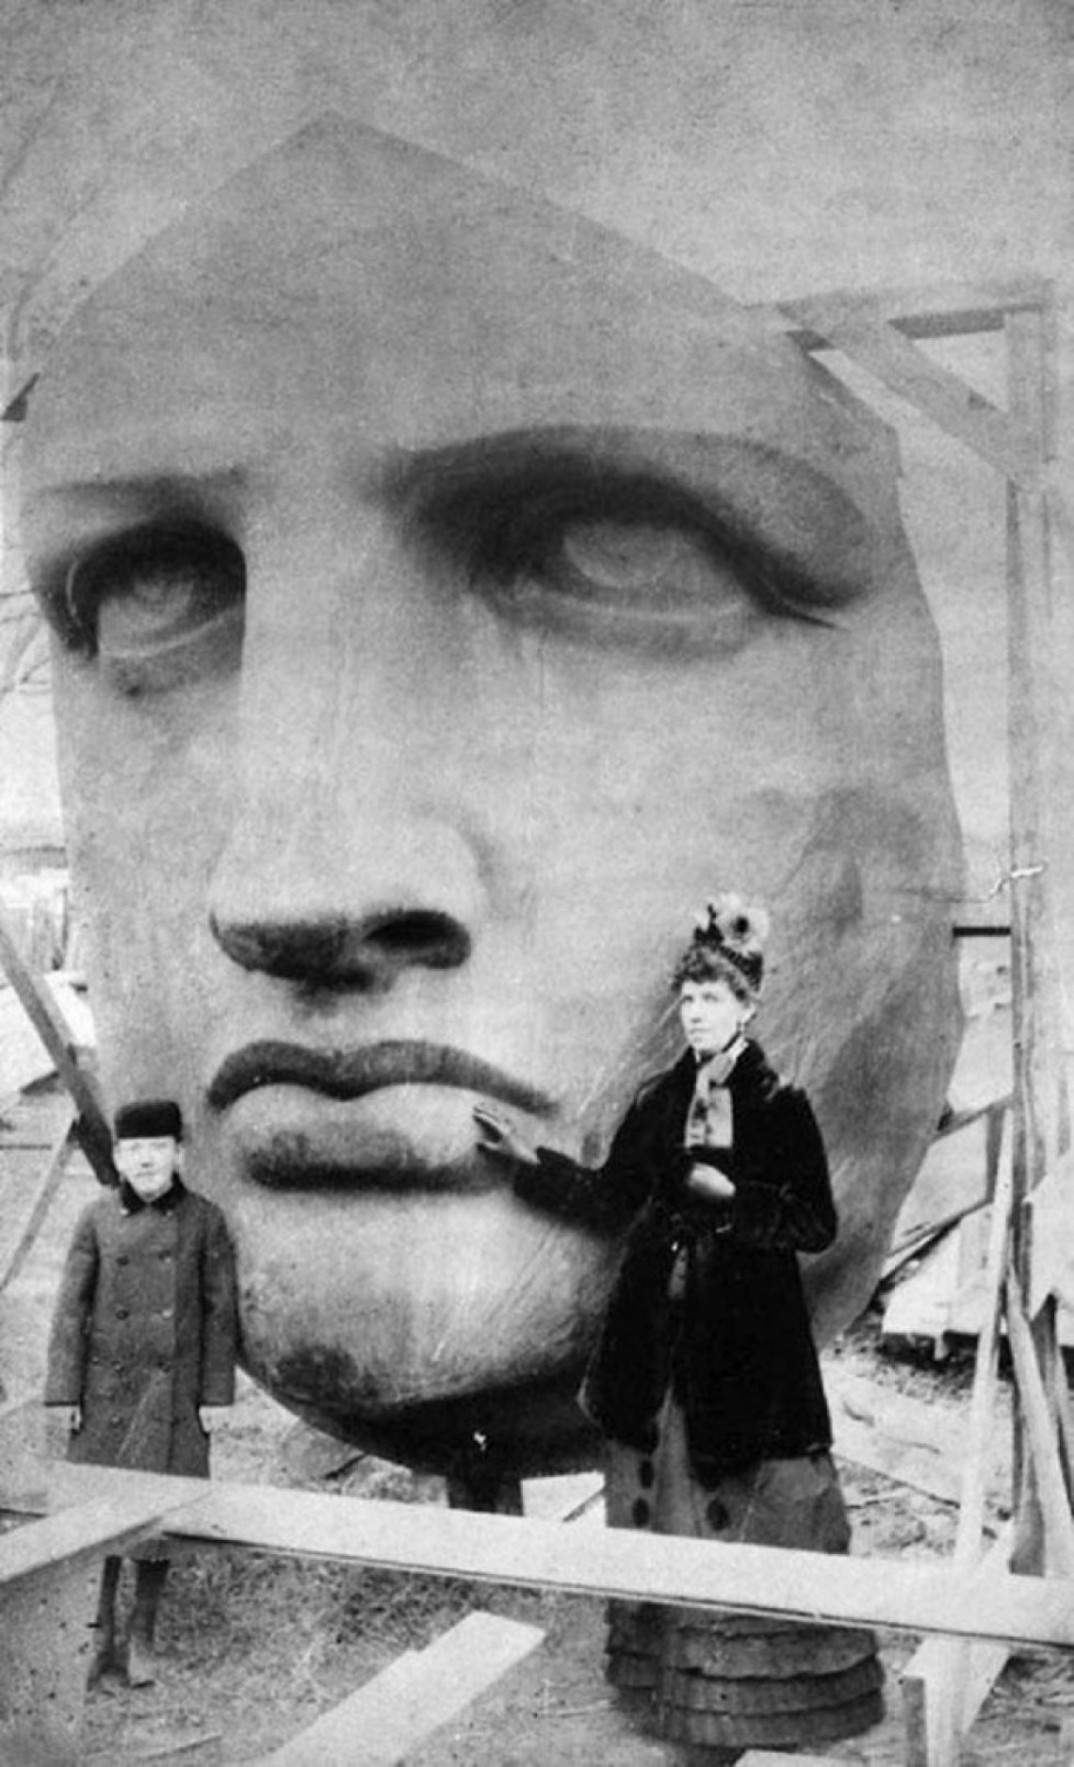 24. Unpacking the head of the Statue of Liberty, 1885